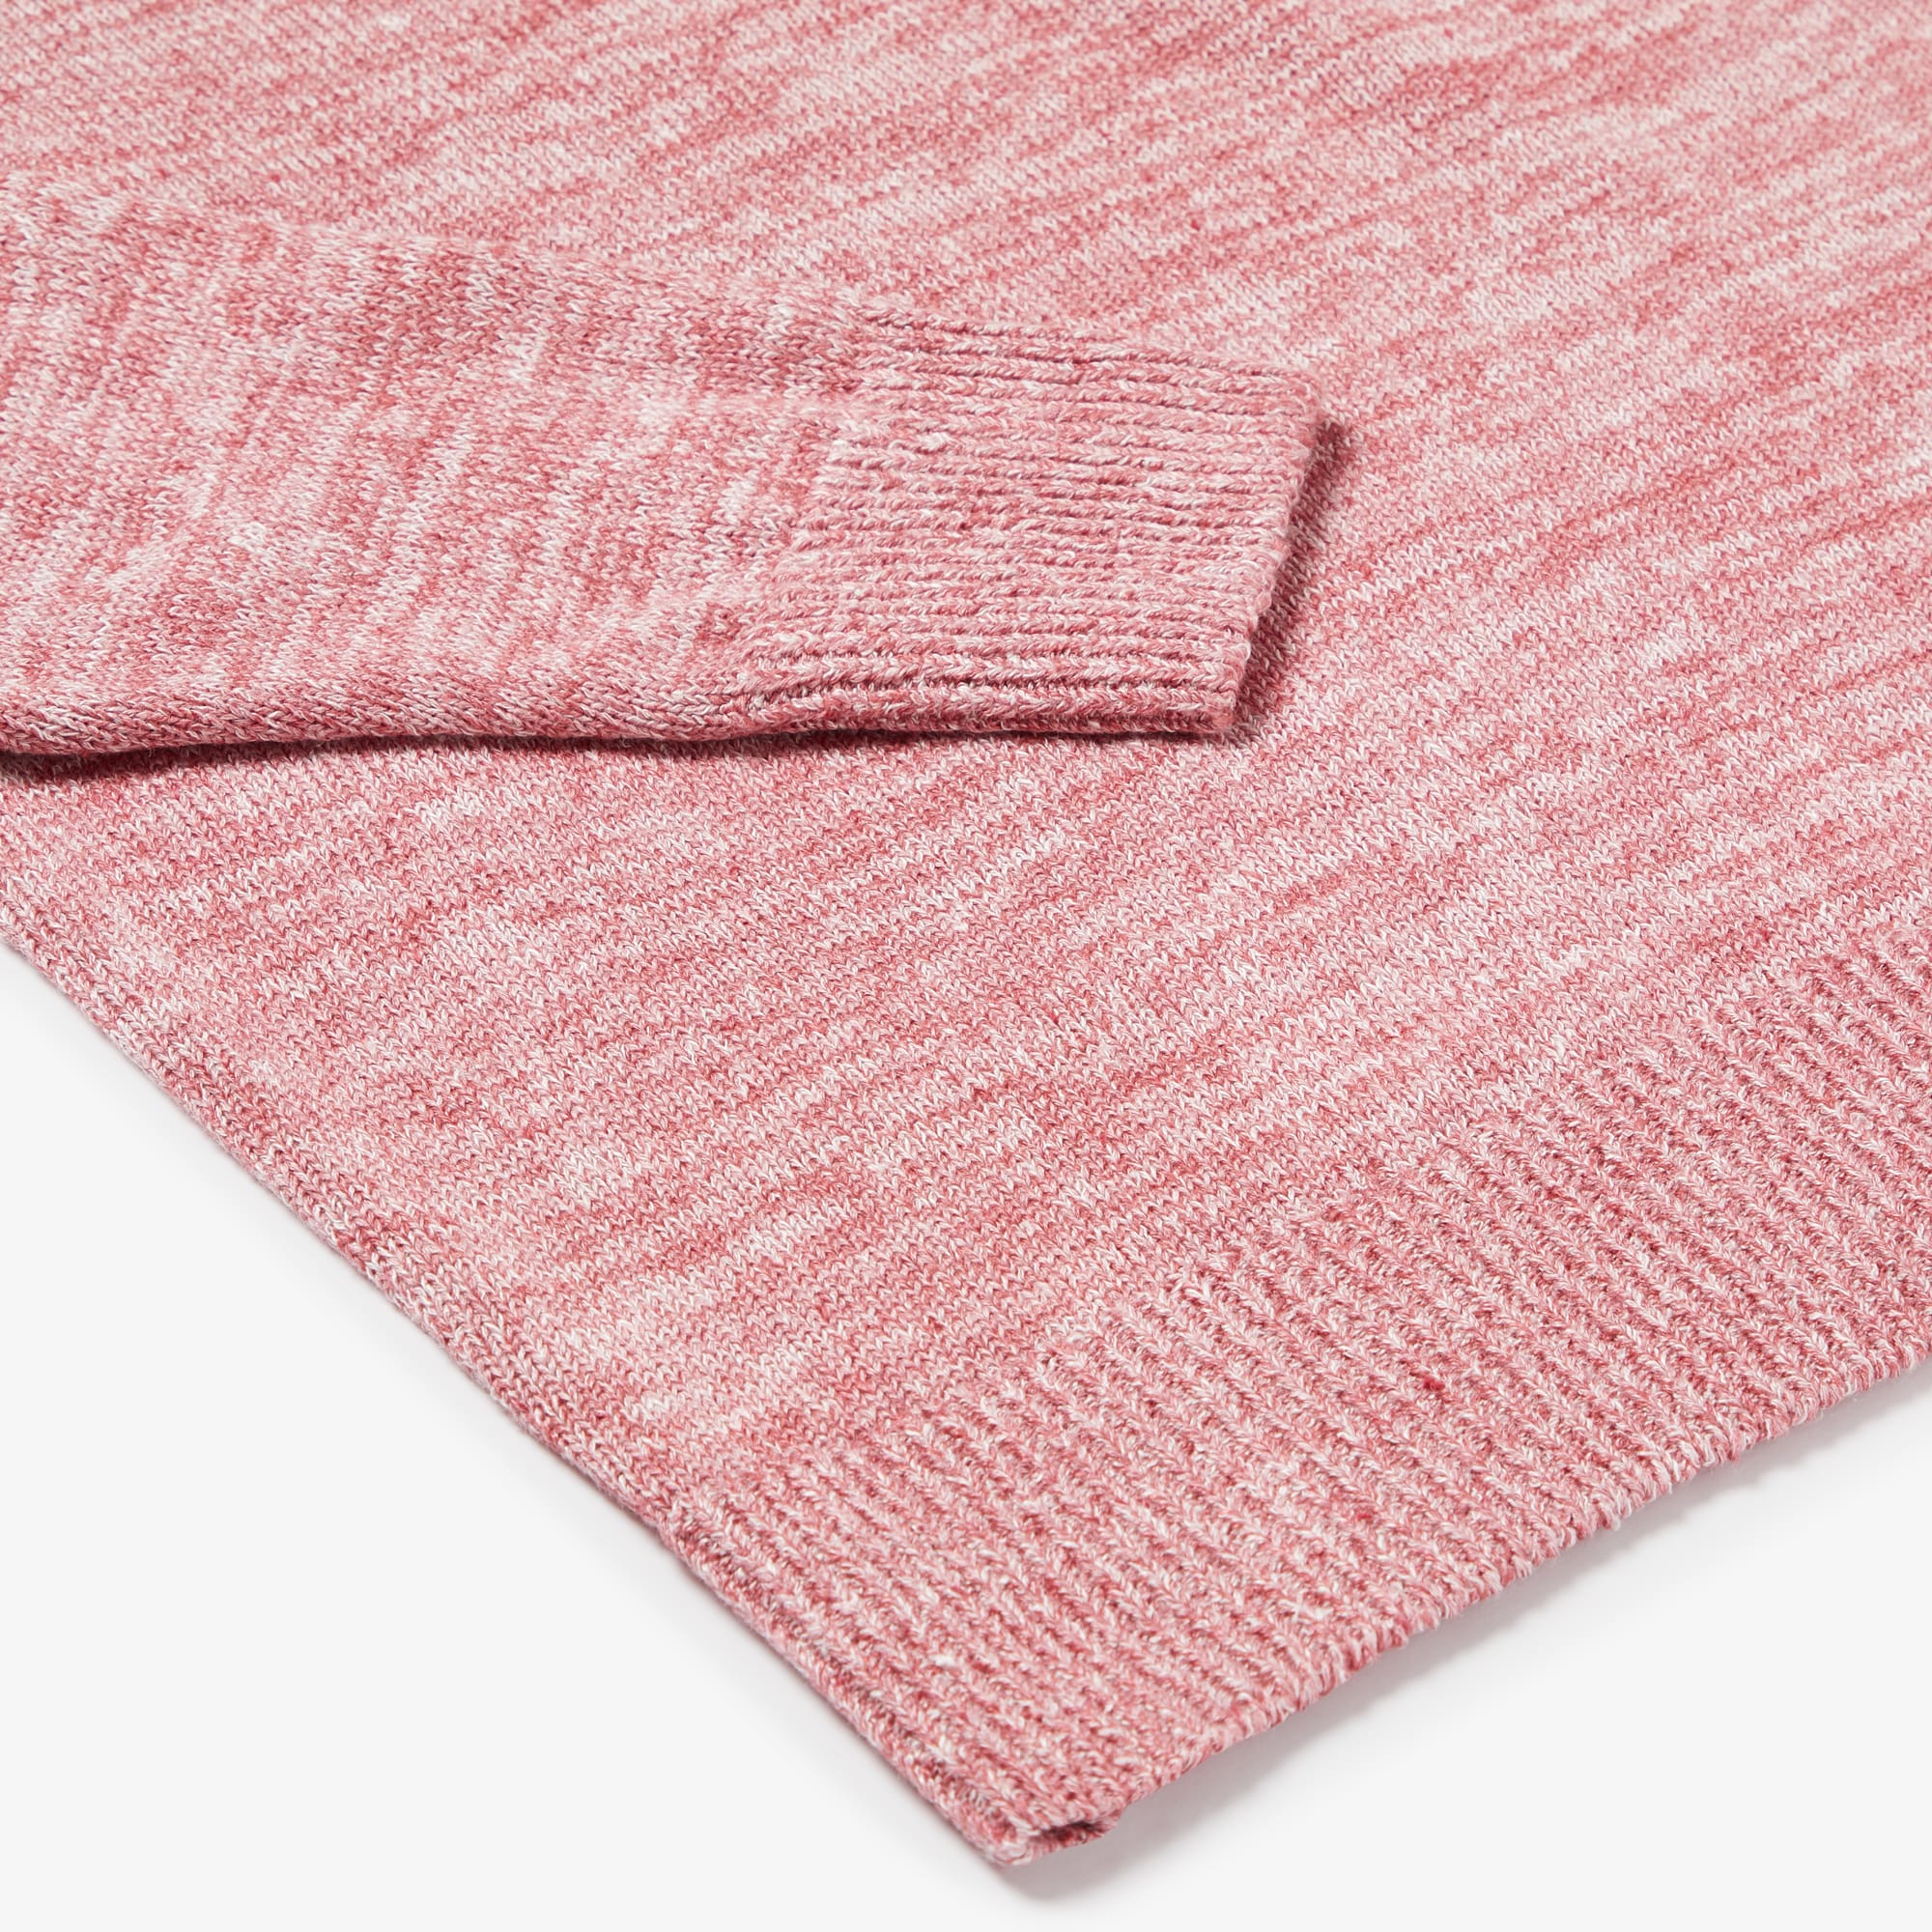 https://inismeain.ie/wp-content/uploads/2023/02/S1441_Inis_Meain_Classic_Crew_Neck_Pink_Marl_1x1_Product_4.jpg